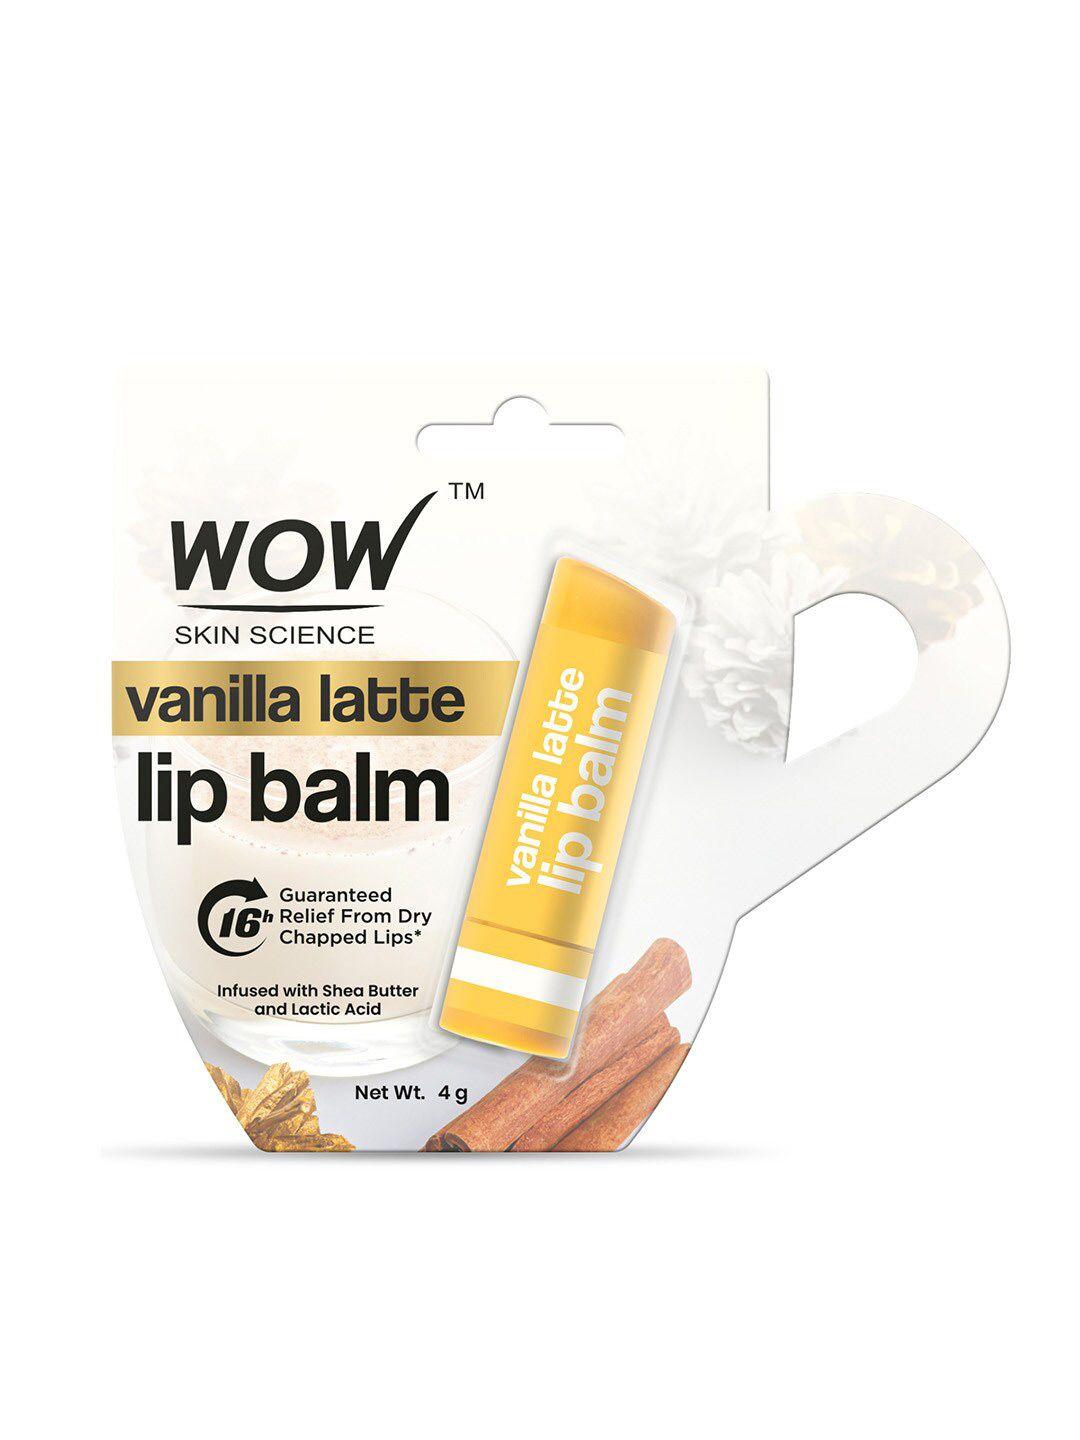 wow skin science vanilla latte lip balm with shea butter & lactic acid 4 g - white